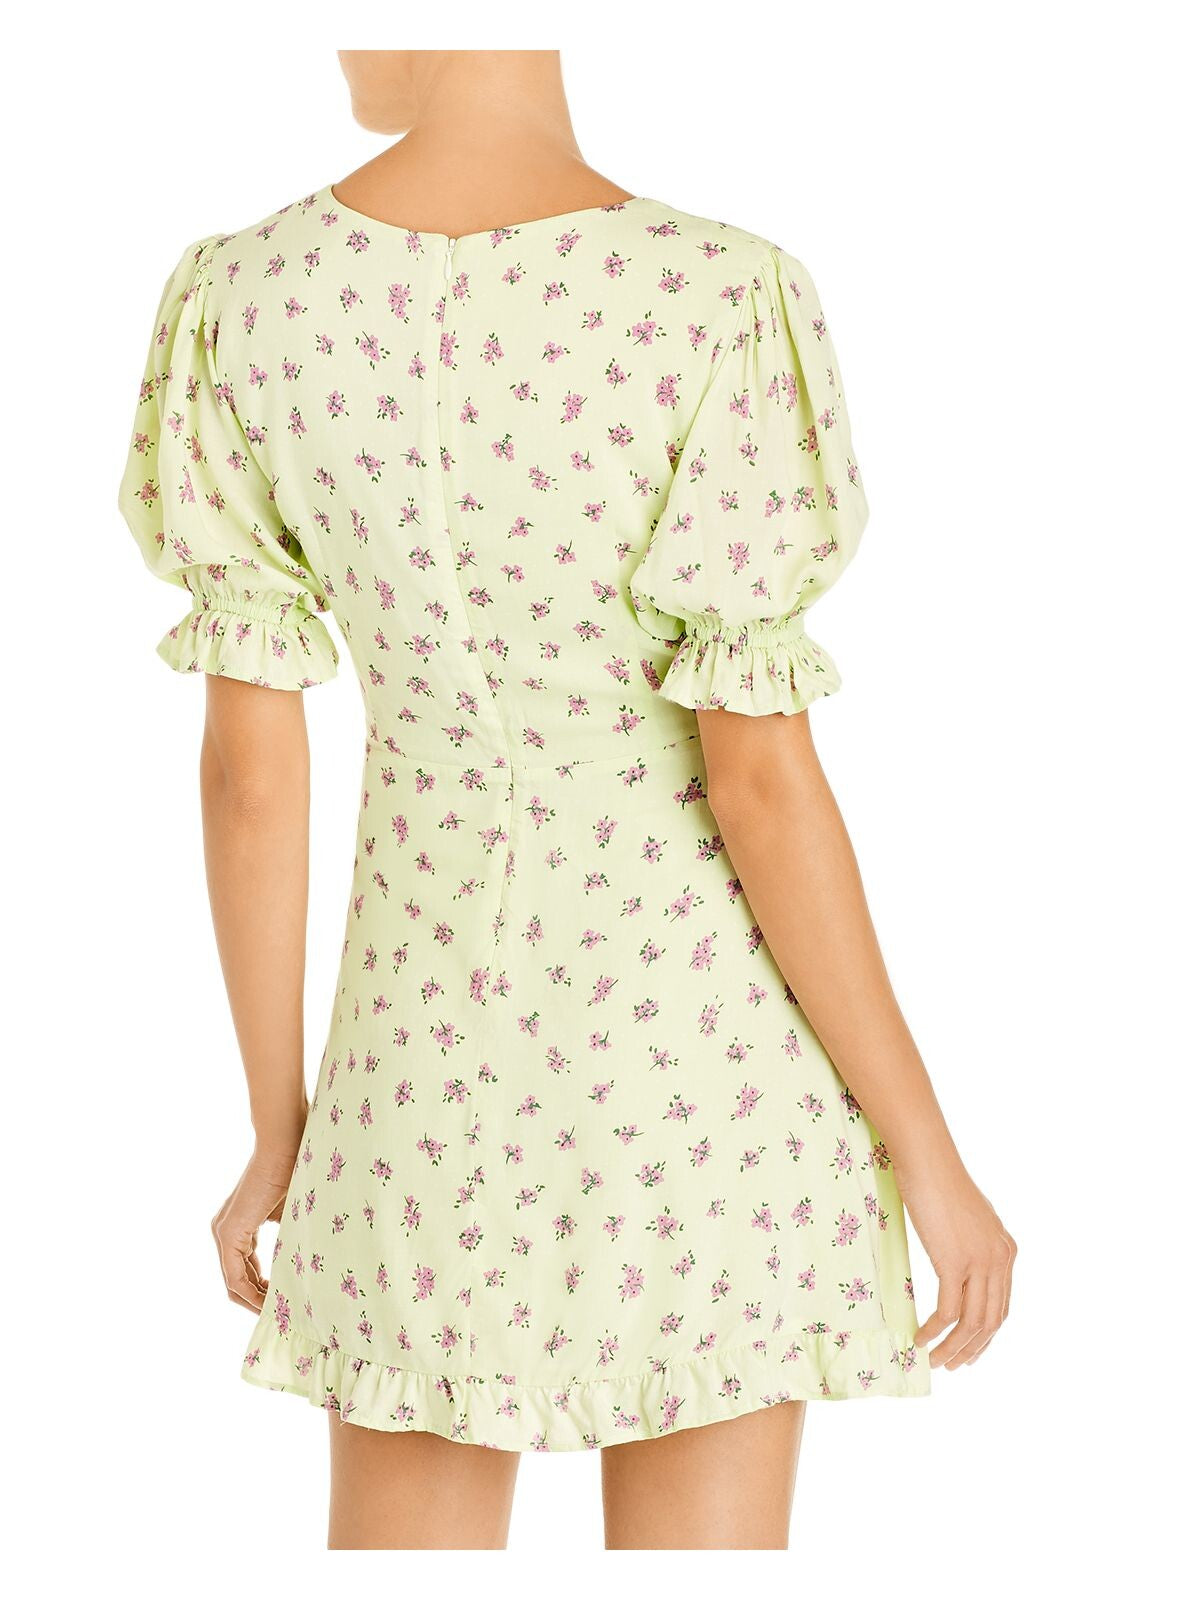 FAITHFULL THE BRAND Womens Green Ruffled Tie Floral Elbow Sleeve Crew Neck Short Fit + Flare Dress 4